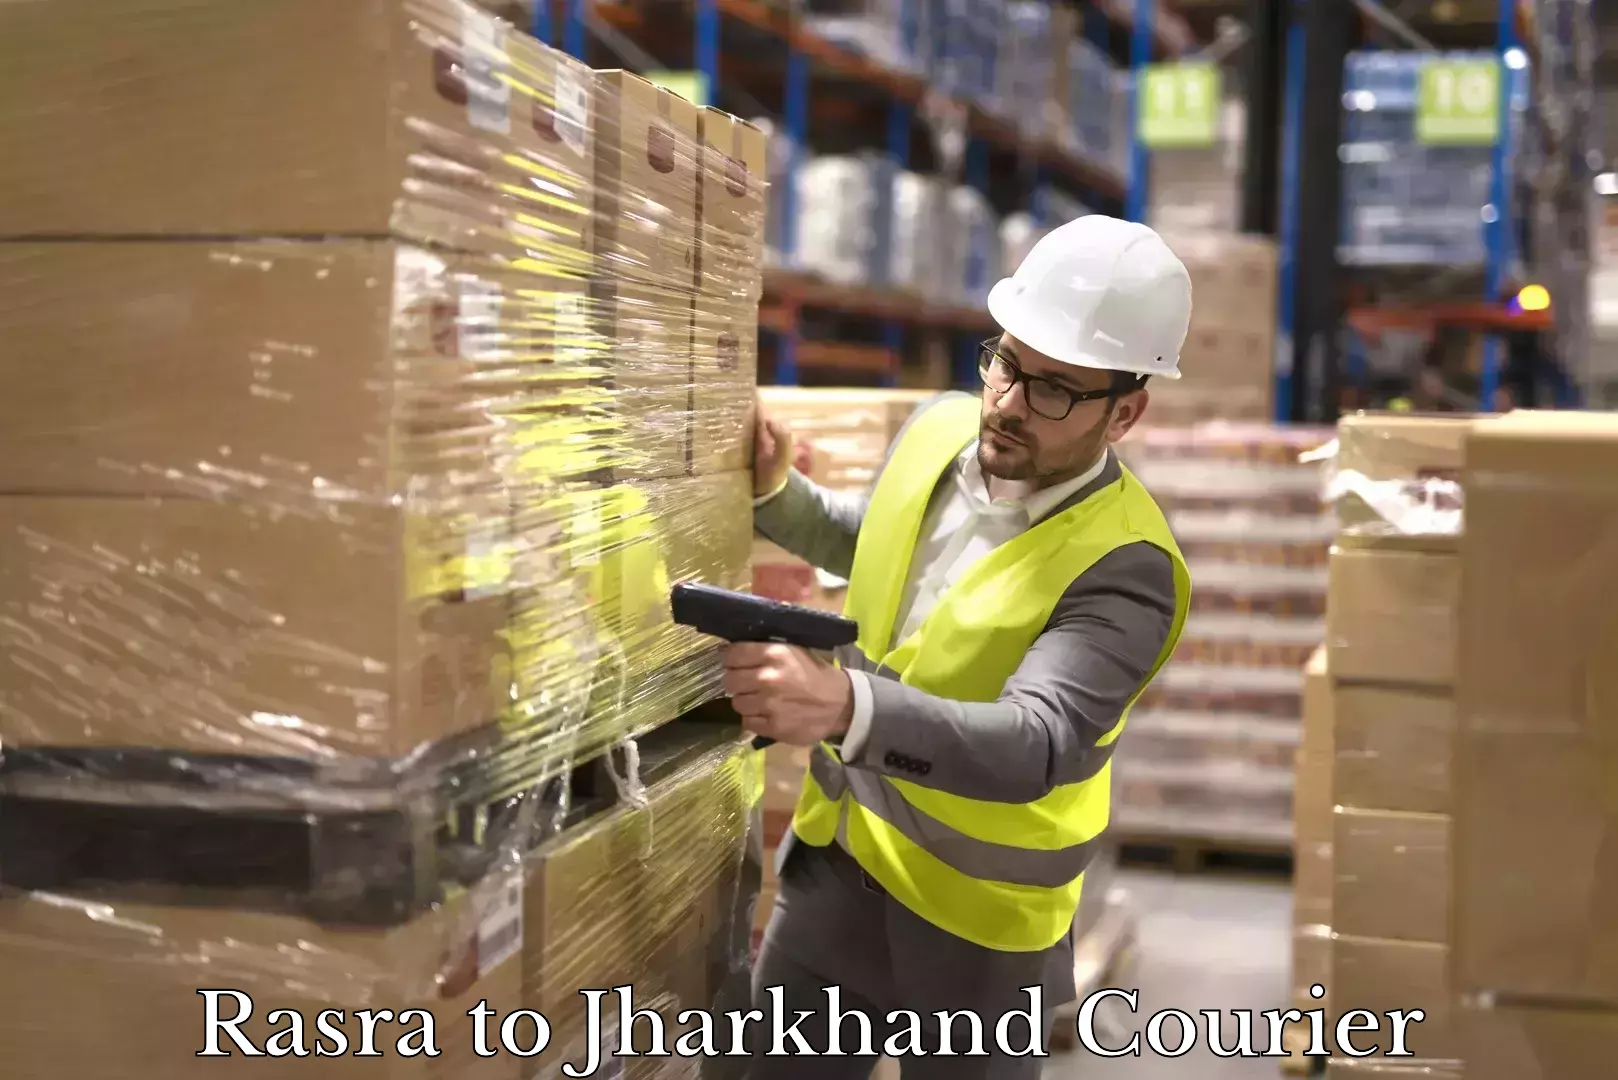 Professional courier handling Rasra to Jharkhand